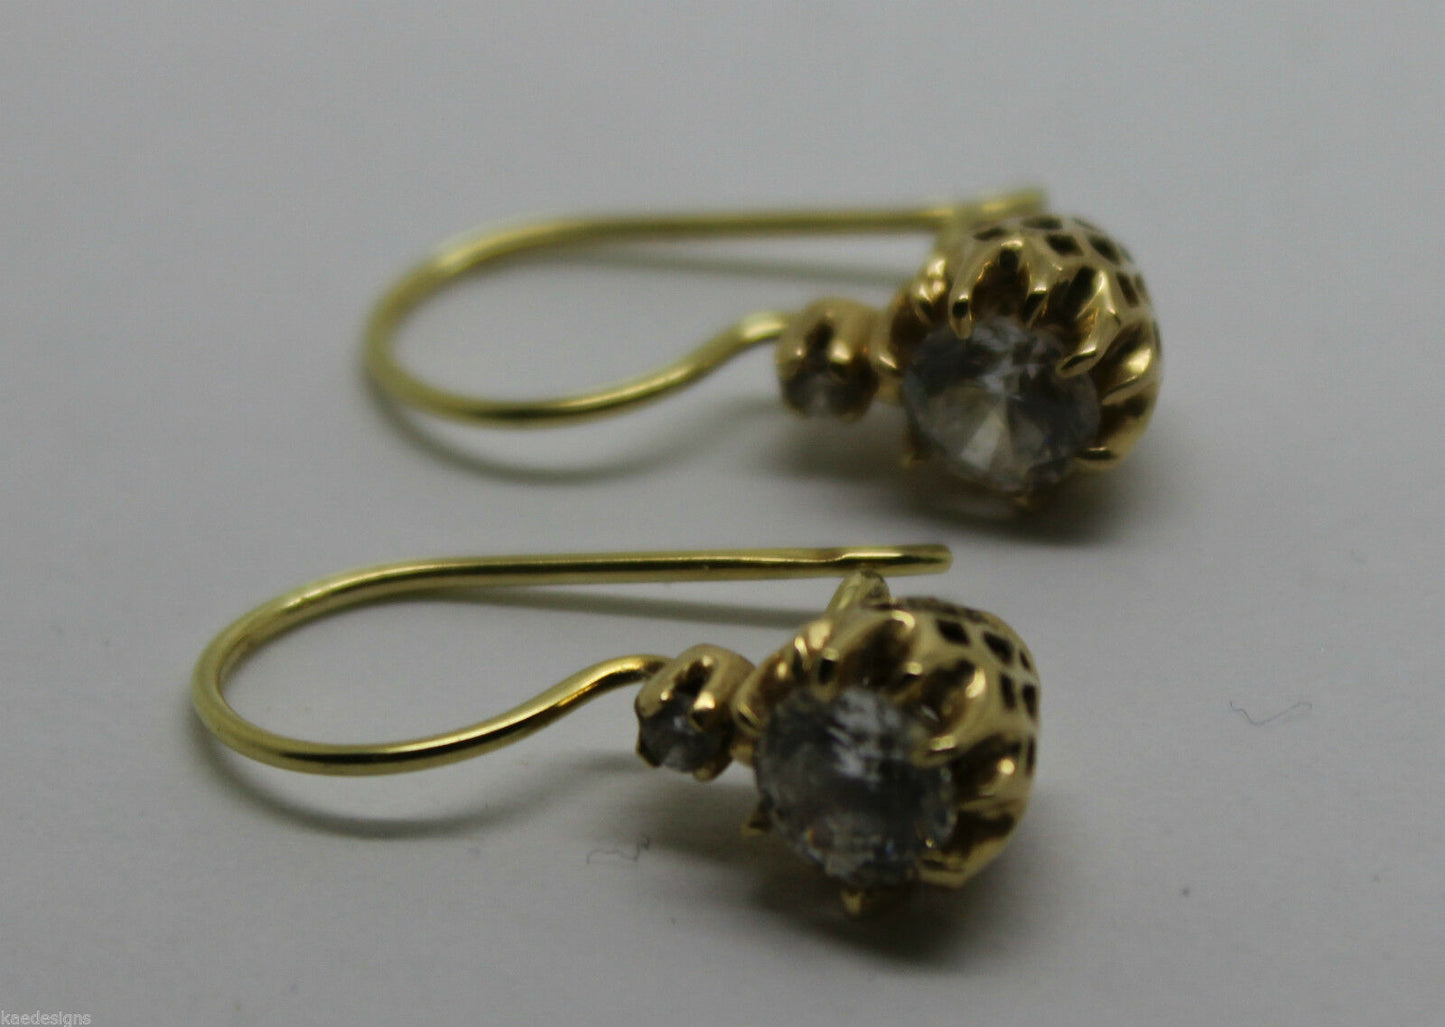 New 14ct 585 Full Solid Yellow Gold Cubic Zirconia Stone Earrings *Free Express Post In Oz